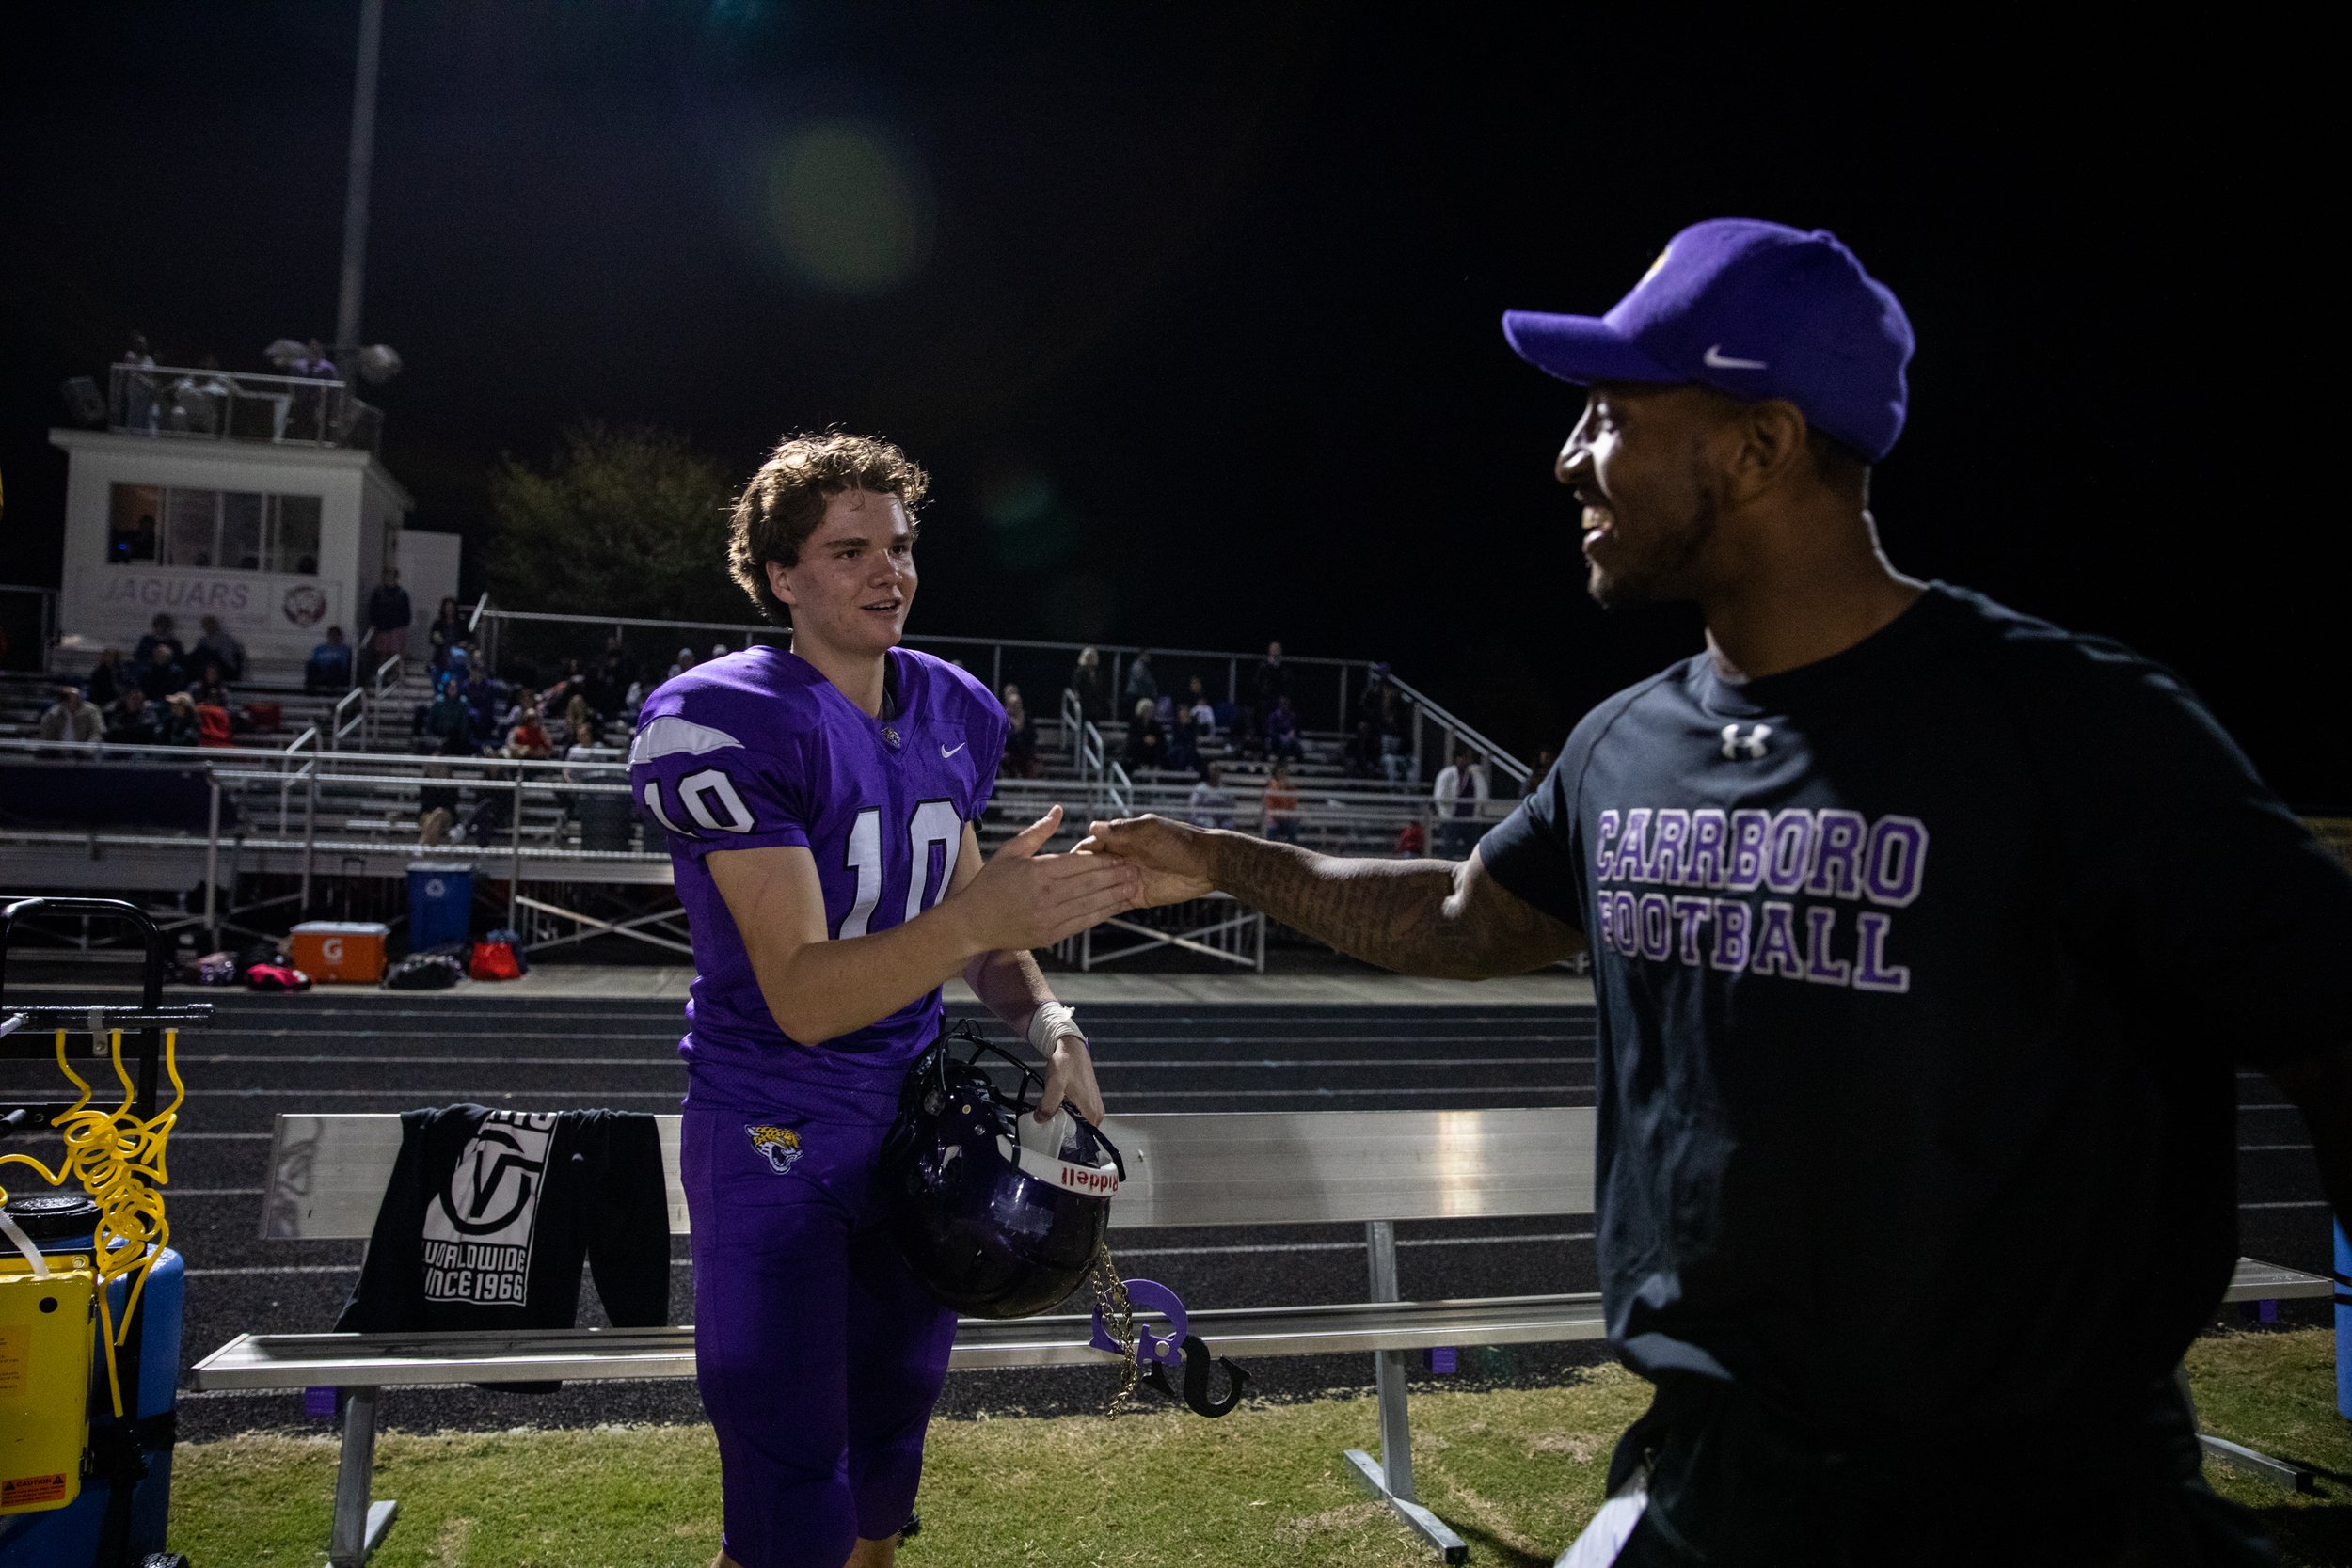  Special Teams Coach Fred Dale congratulates Jake Adams, a junior on the Carrboro High School football team, and gives him a special GS Necklace, short for “Goon Squad,” that Dale made to give to his players whenever they complete a special teams pla